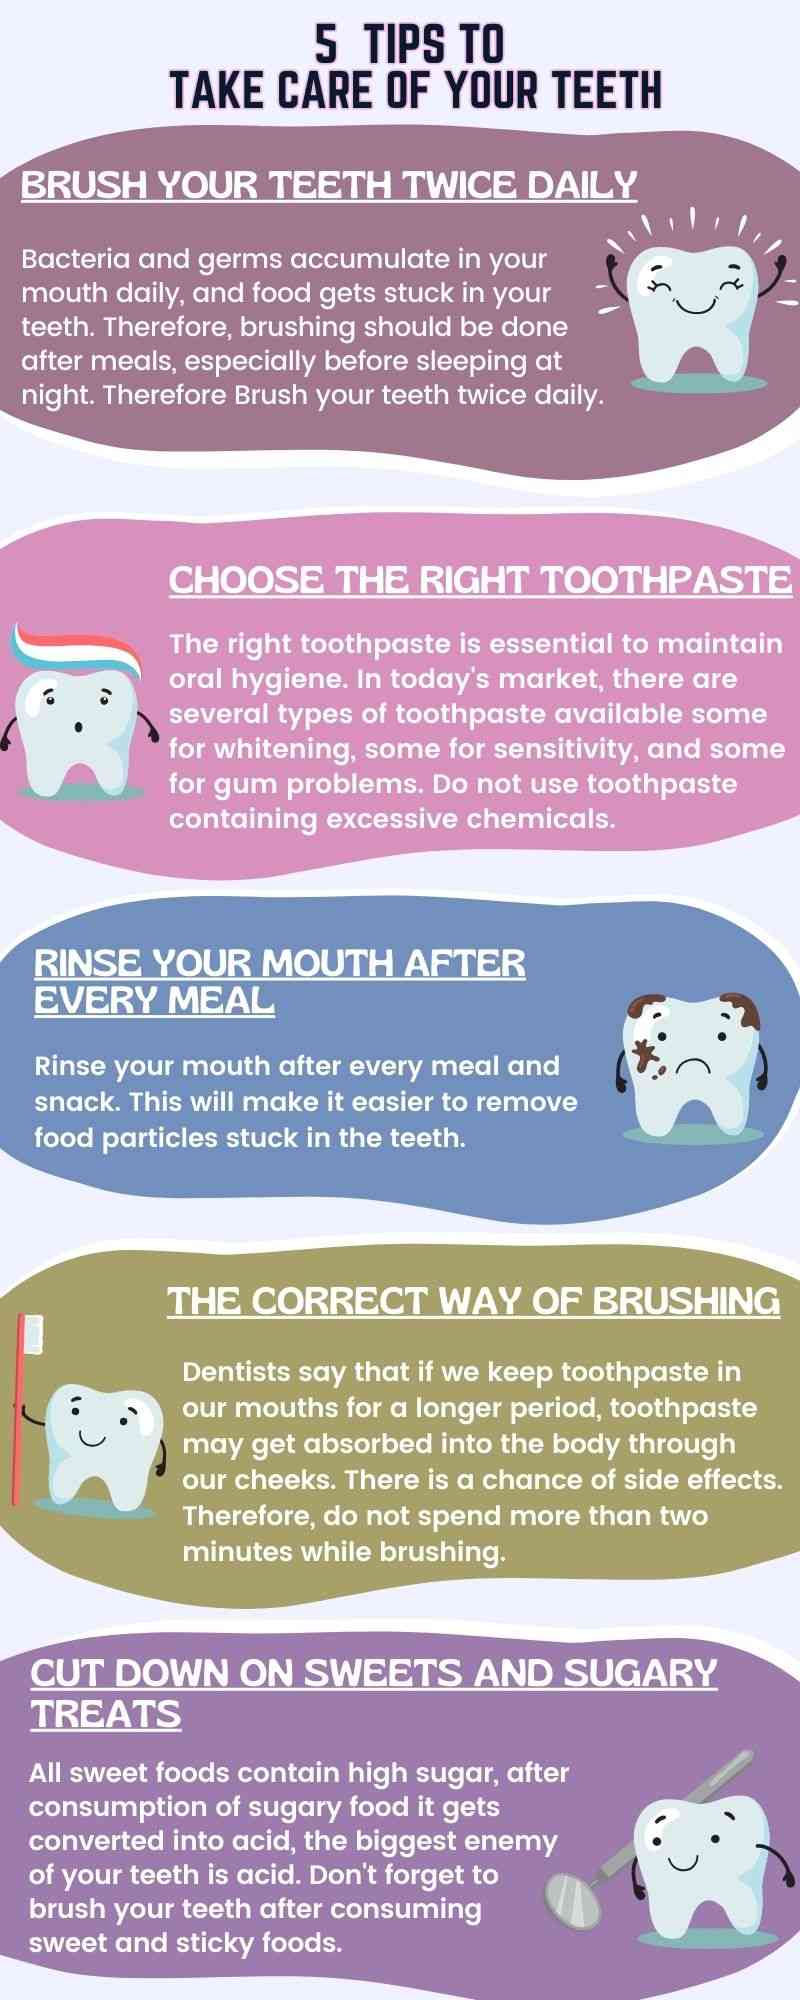 5 Easy Tips To Take Care Of Your Teeth